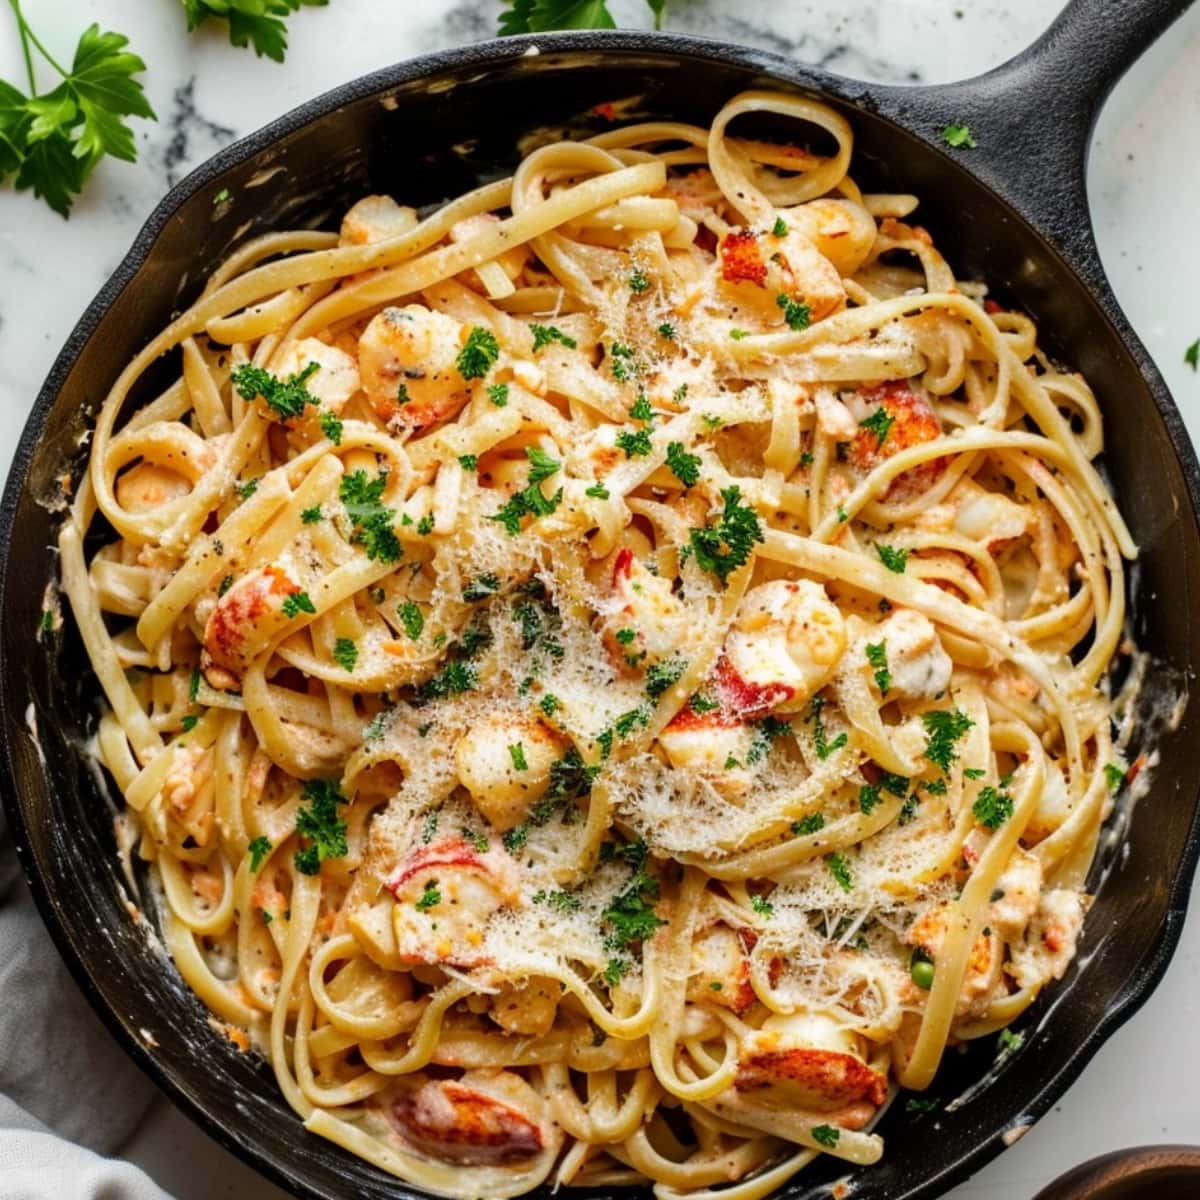 Creamy linguine with lobster in a cast iron skillet.